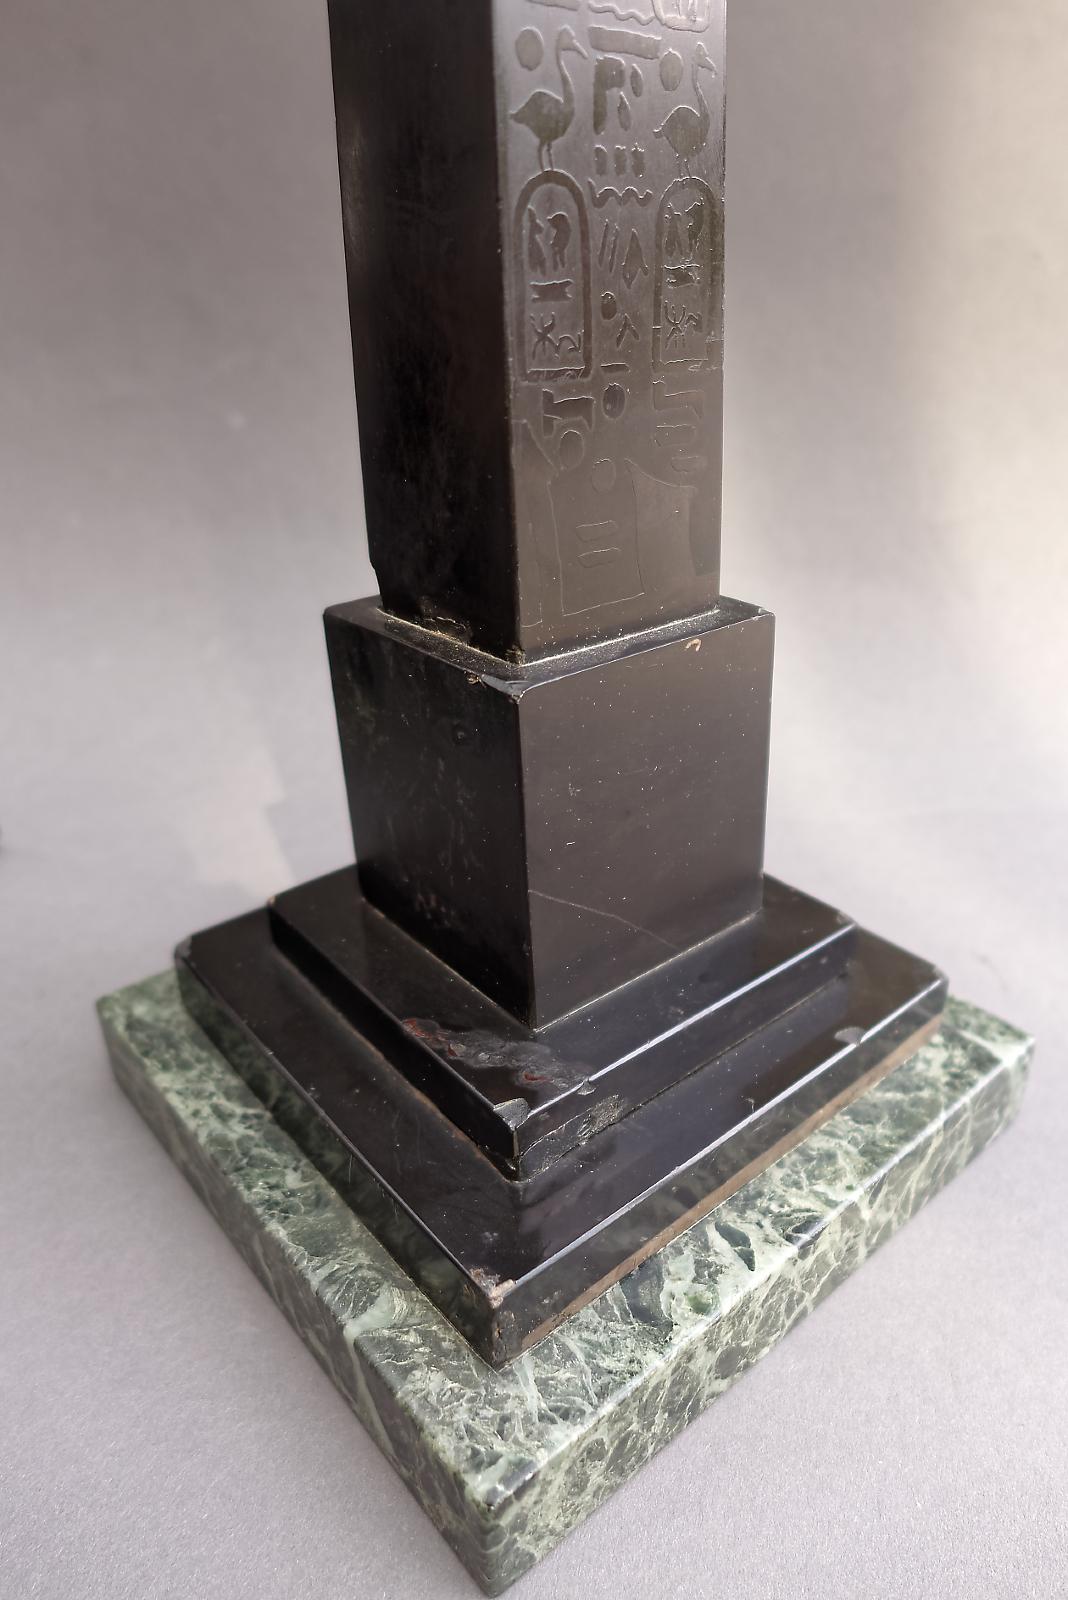 A very attractive pair of Italian Grand Tour black marble obelisks. Detailed hieroglyphics to the front side, on a green marble plinth. Minor corner chips to both obelisks, otherwise nice, original condition. 

The Grand Tour was a traditional